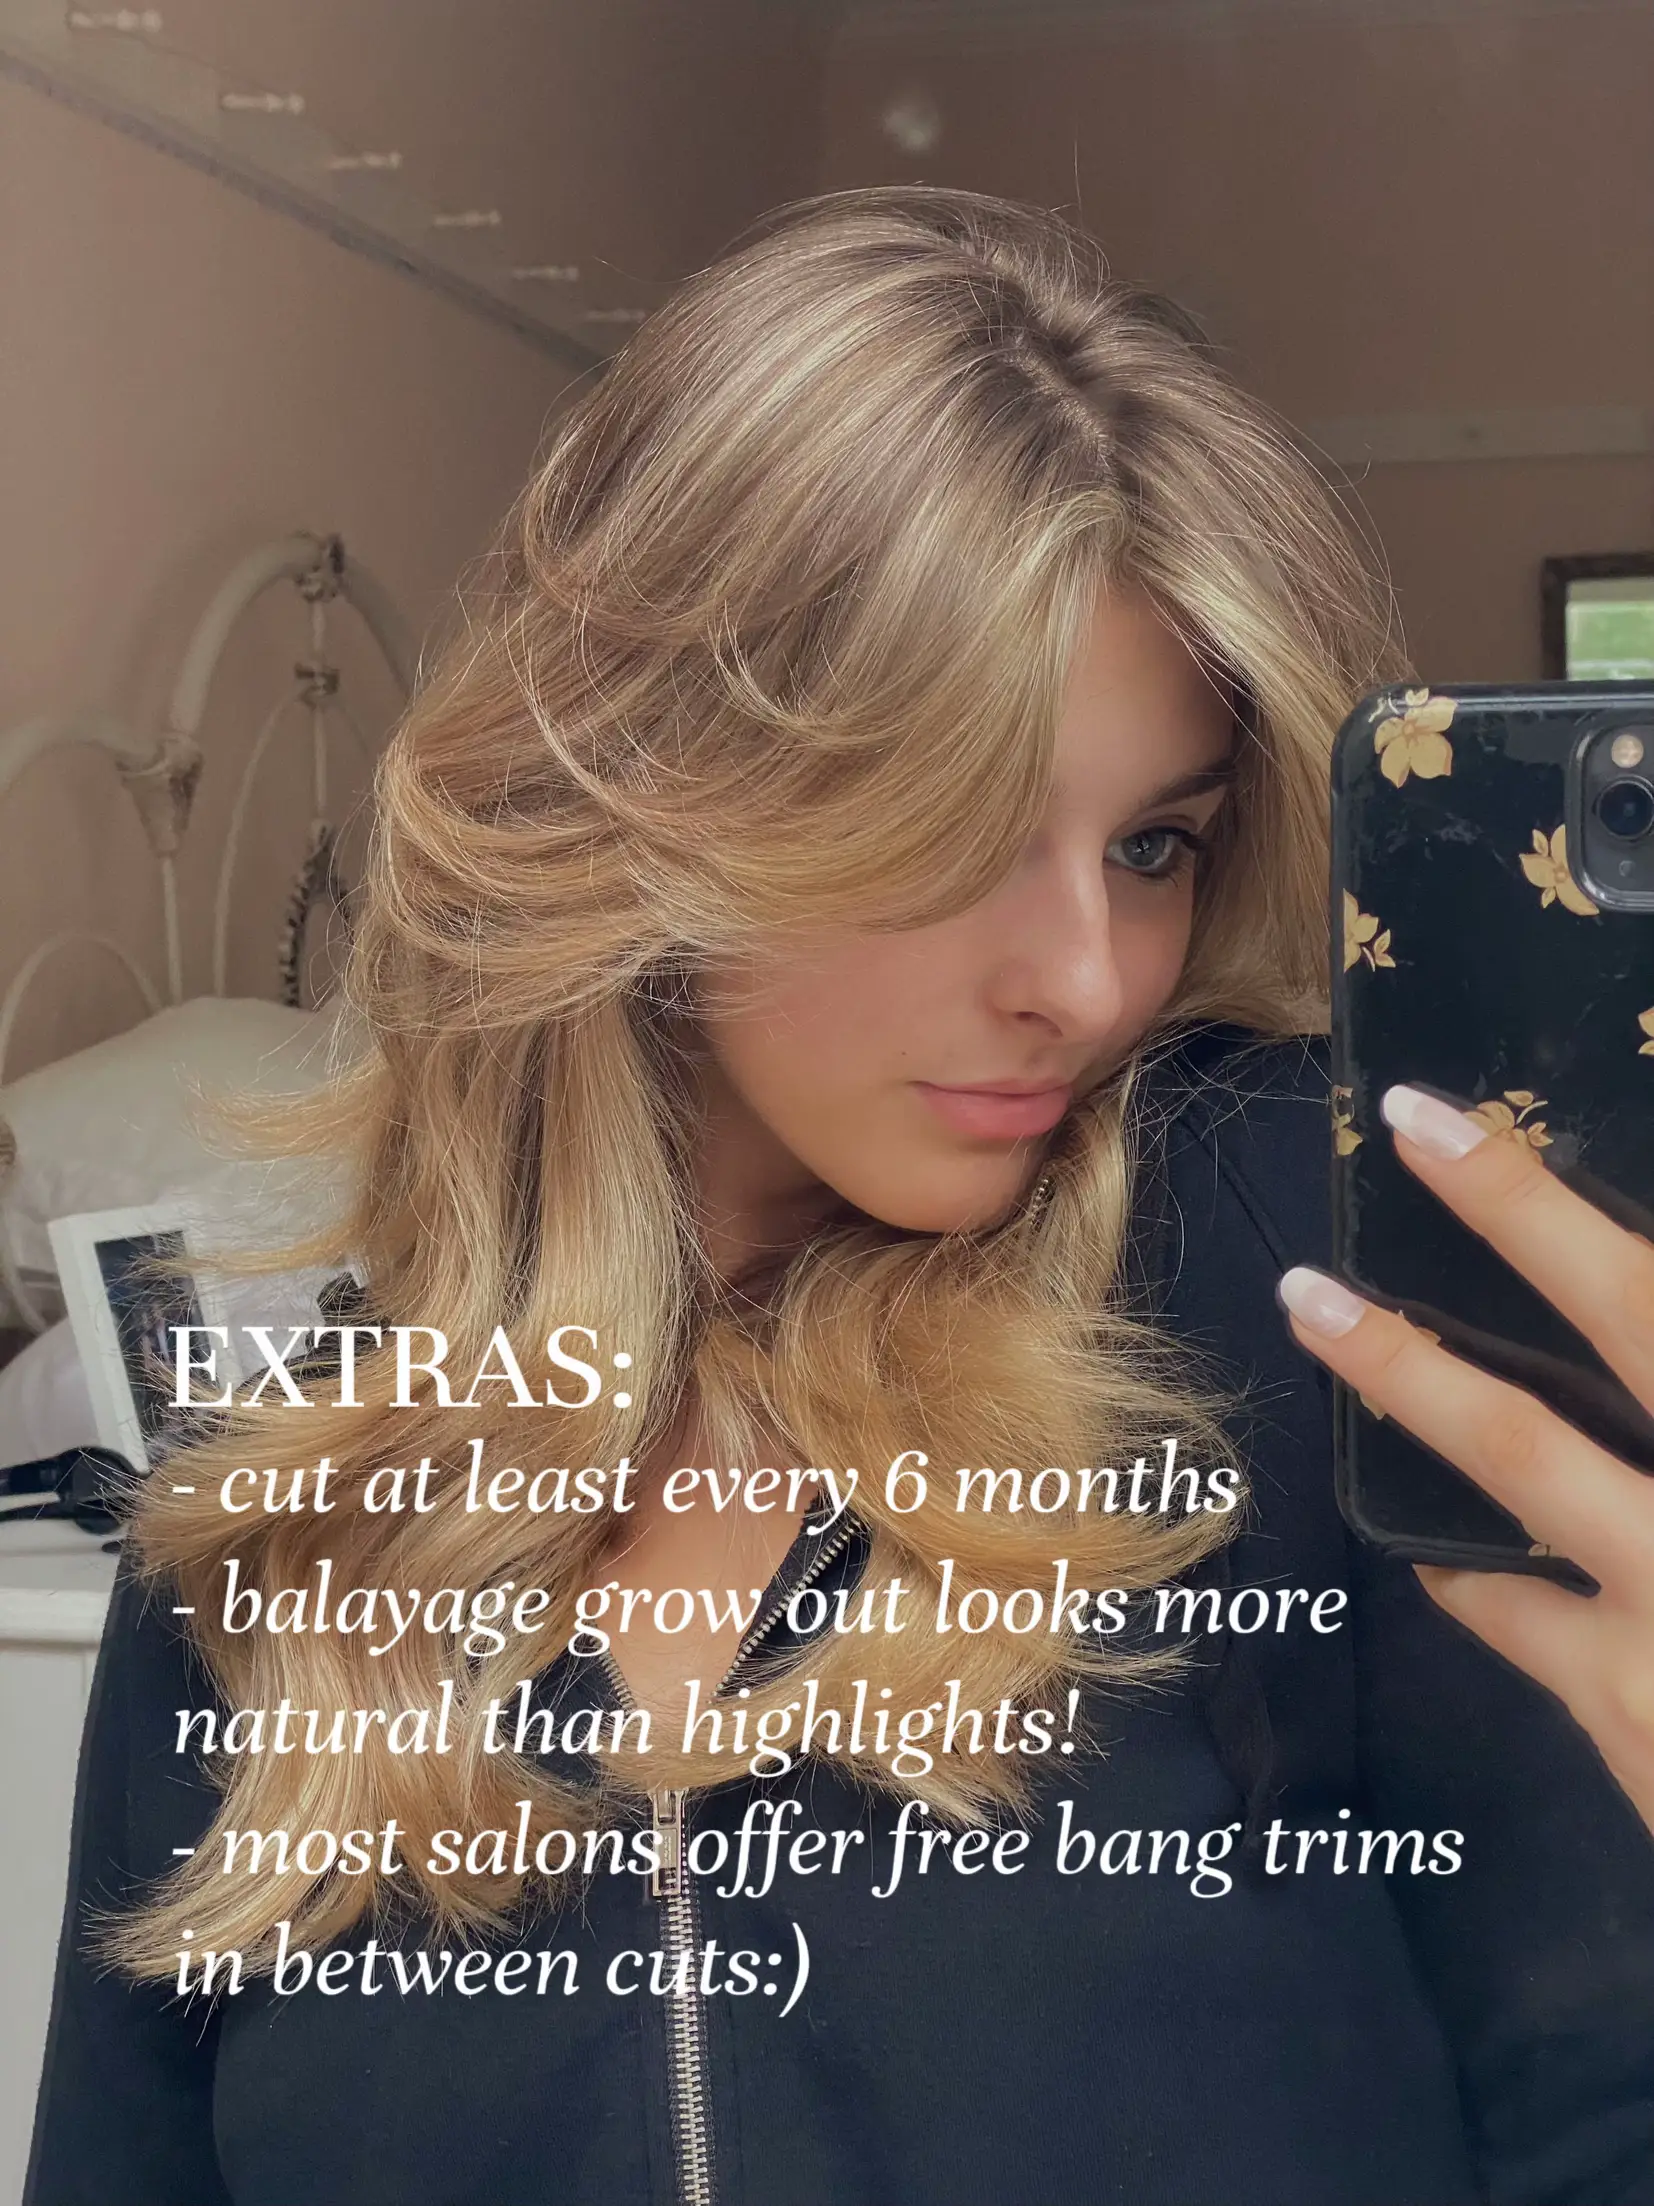 Newlook's Signature Soft Blend Haircolor Transformation with